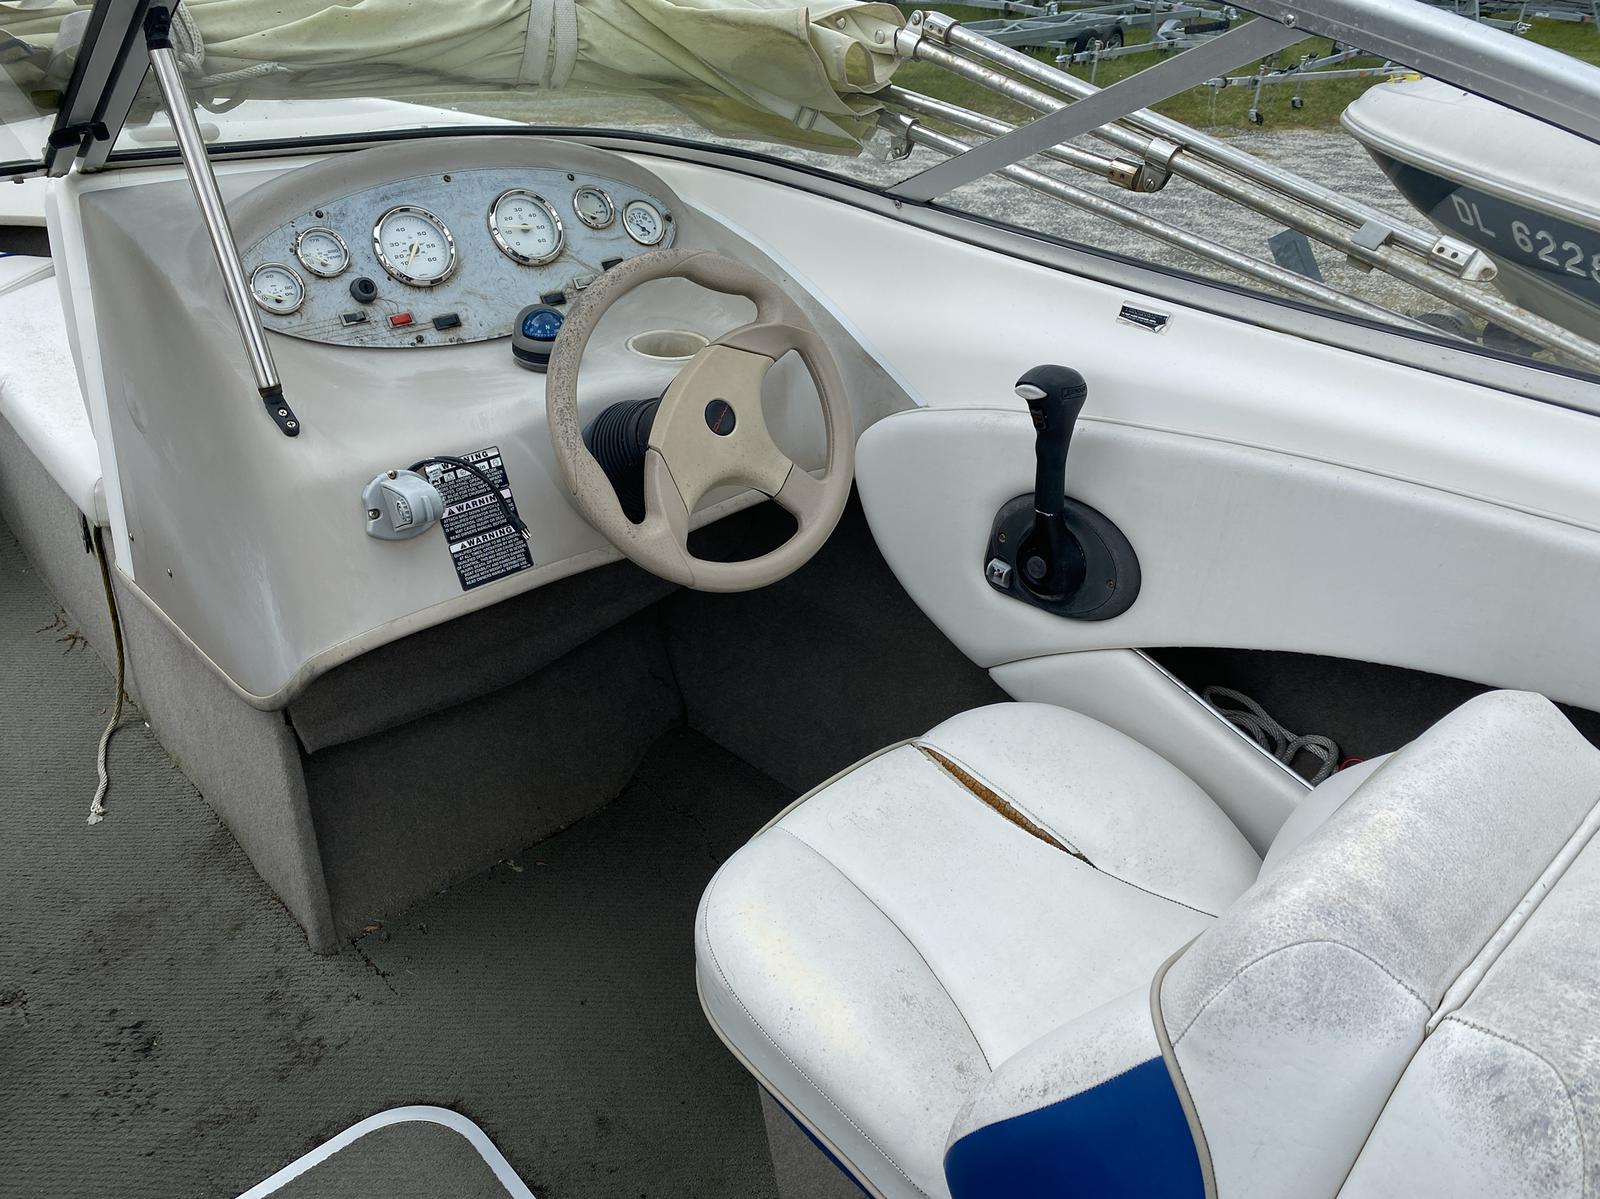 2004 Bayliner boat for sale, model of the boat is 215BR Classic21 & Image # 8 of 9